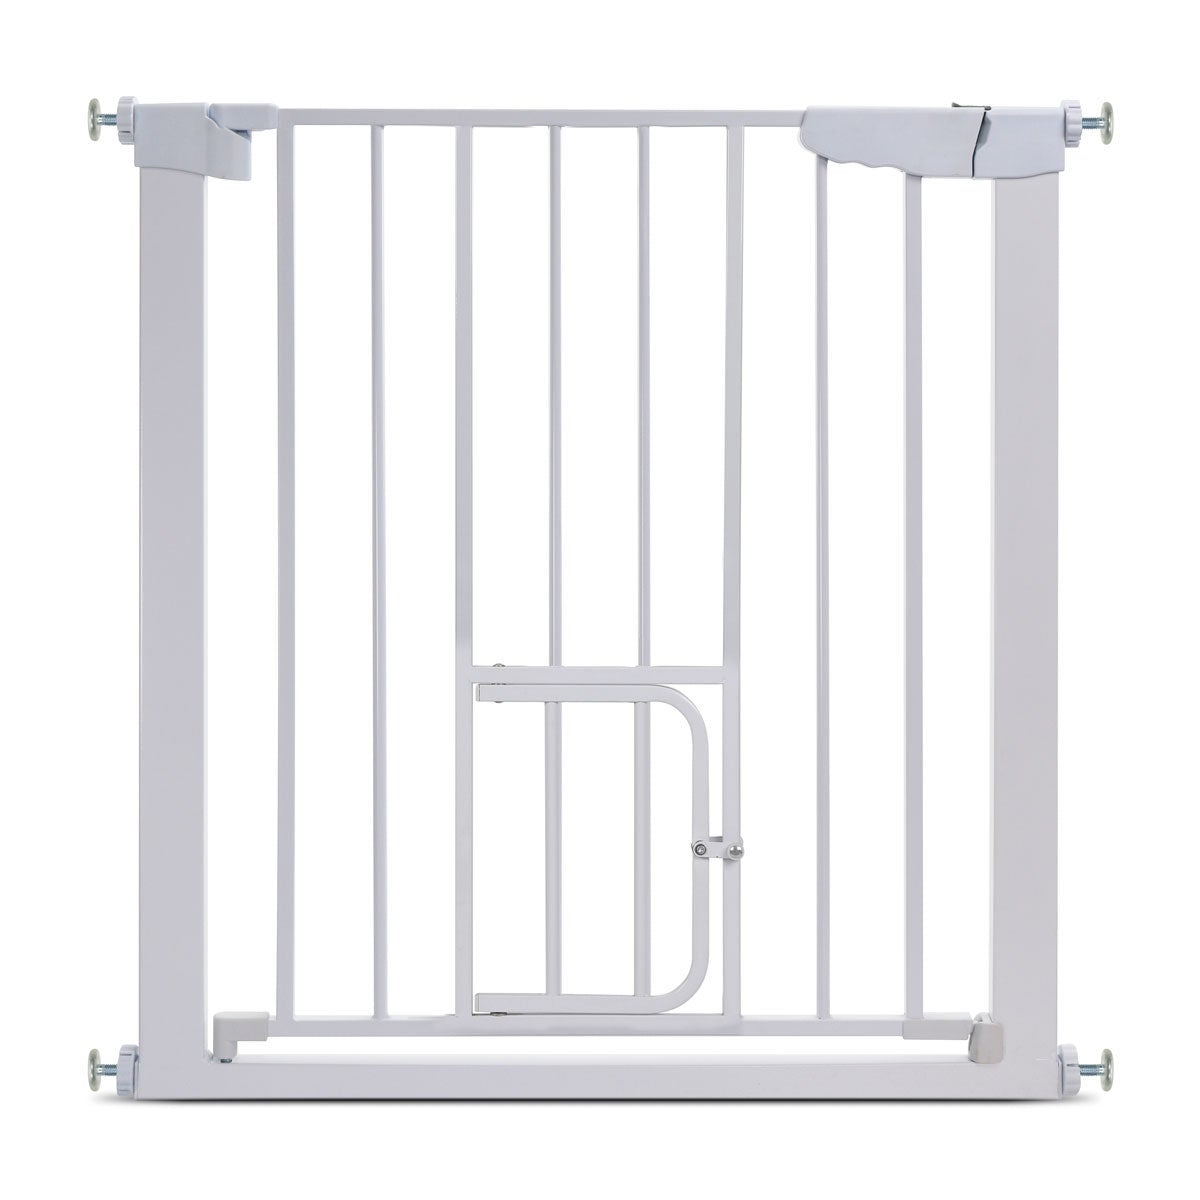 76cm Tall Auto Close Baby Gate with Cat Door Metal Cat Gate for Doorway, Stairs, House, Easy Walk Thru Dog Gate with Pet Door